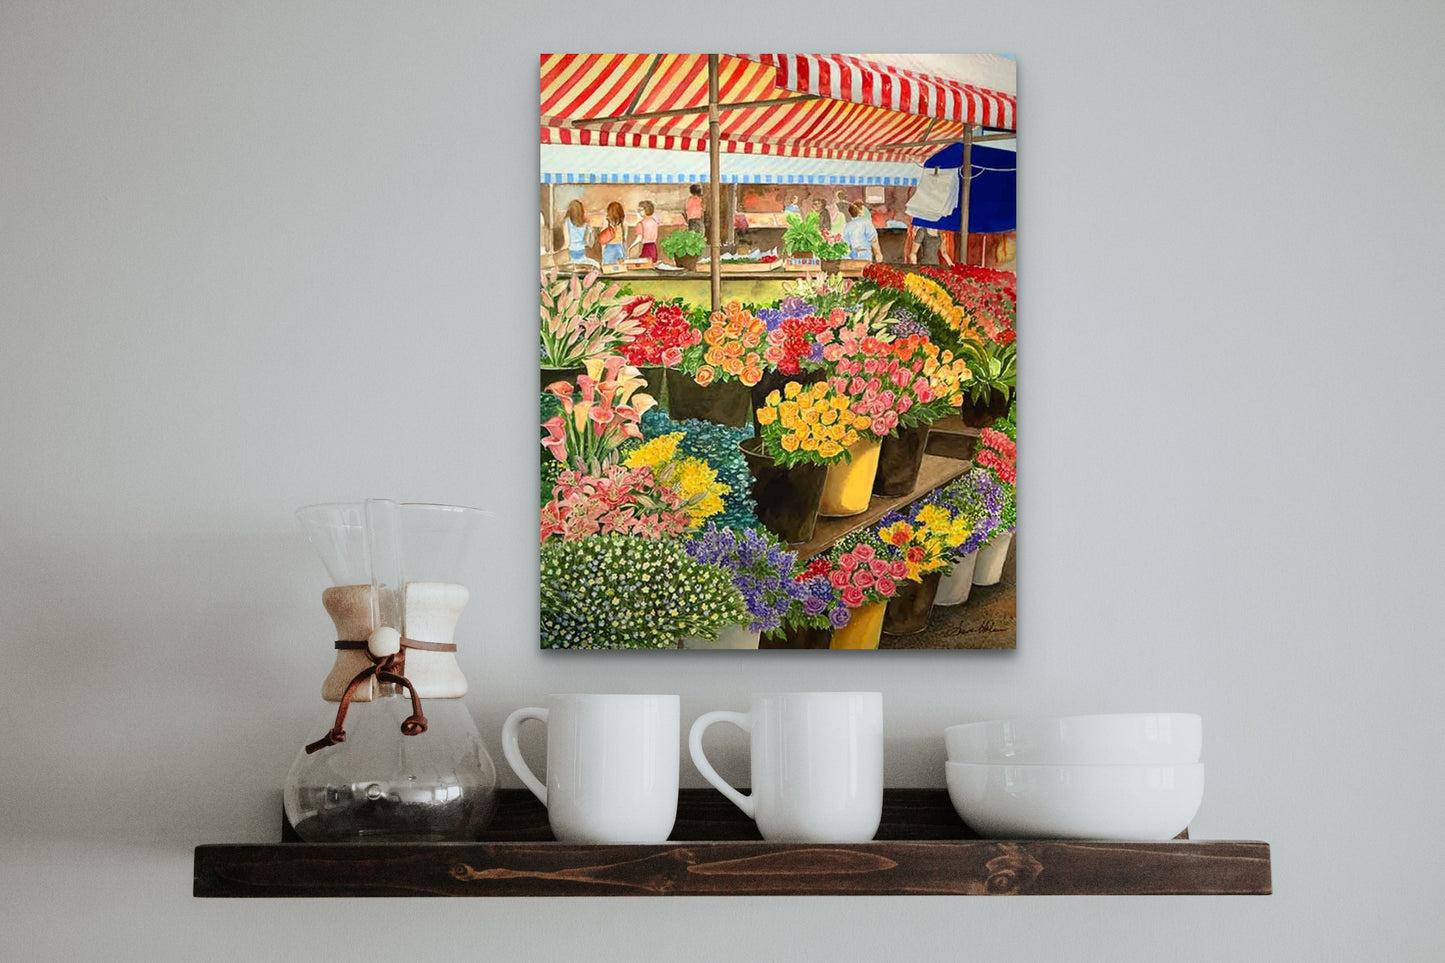 Flowewr market watercolour print will make a great piece of wall art for your home.